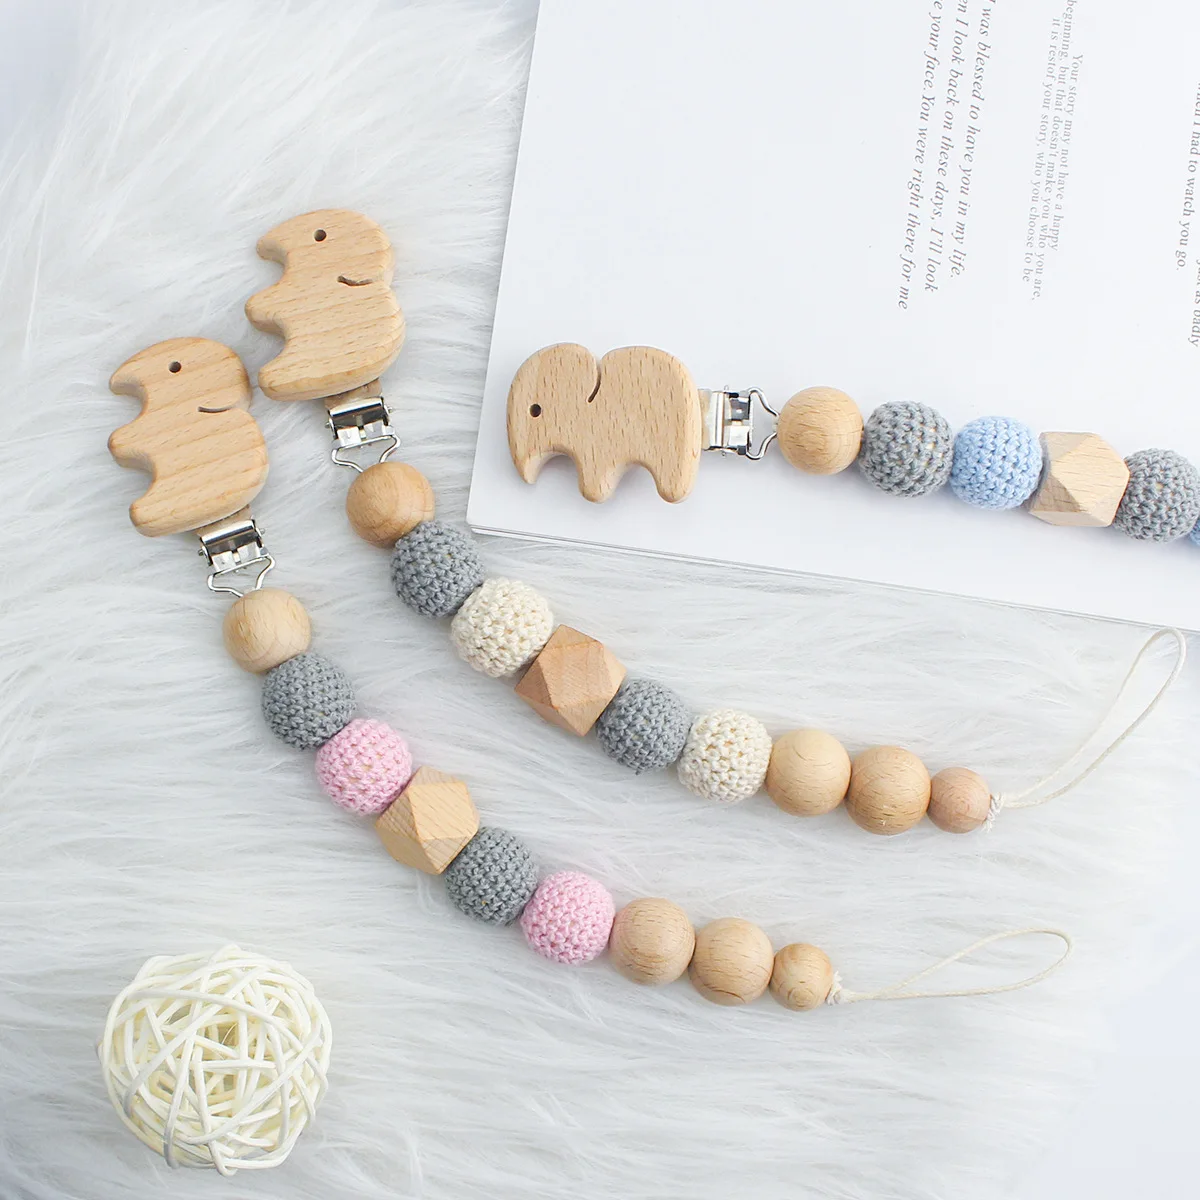 Hot Sale Safety Baby Silicone Beech Pacifier Chain Baby Comfort Toys Gum Wooden Clip Chain Children's Animal Elephant Gum Chain